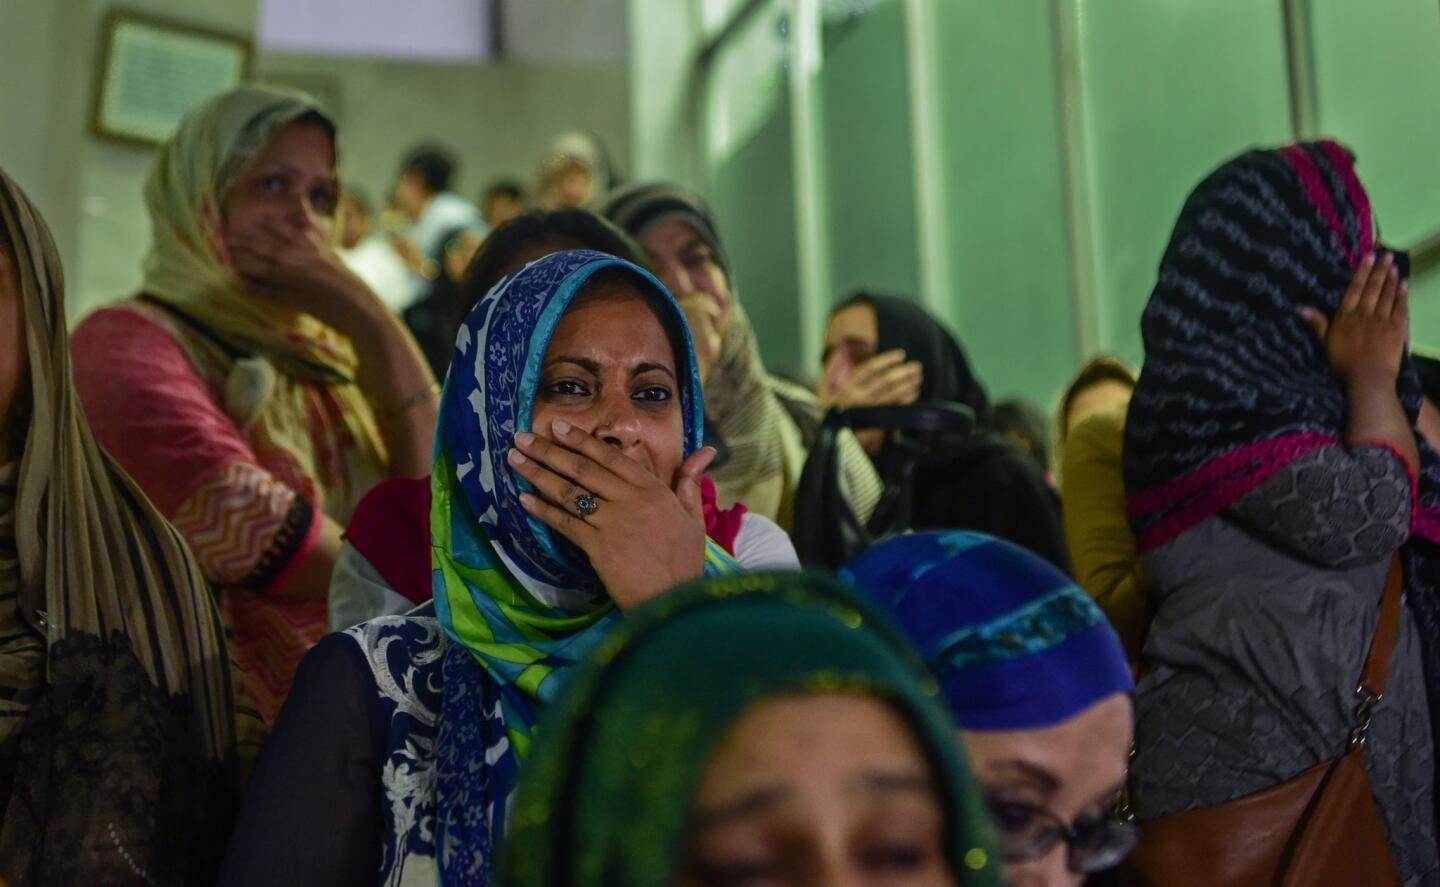 Relatives and friends of two victims of a bloody attack on an upscale restaurant late last week mourn their death during their funeral in Dhaka on July 4, 2016. Relatives of foreign hostages murdered in a Bangladeshi restaurant were in Dhaka on July 4 to take their loved ones' bodies home as authorities made the first arrests over the killings. Many were in tears as Prime Minister Sheikh Hasina laid wreaths on the coffins of those killed in the siege at an upmarket cafe in the capital.